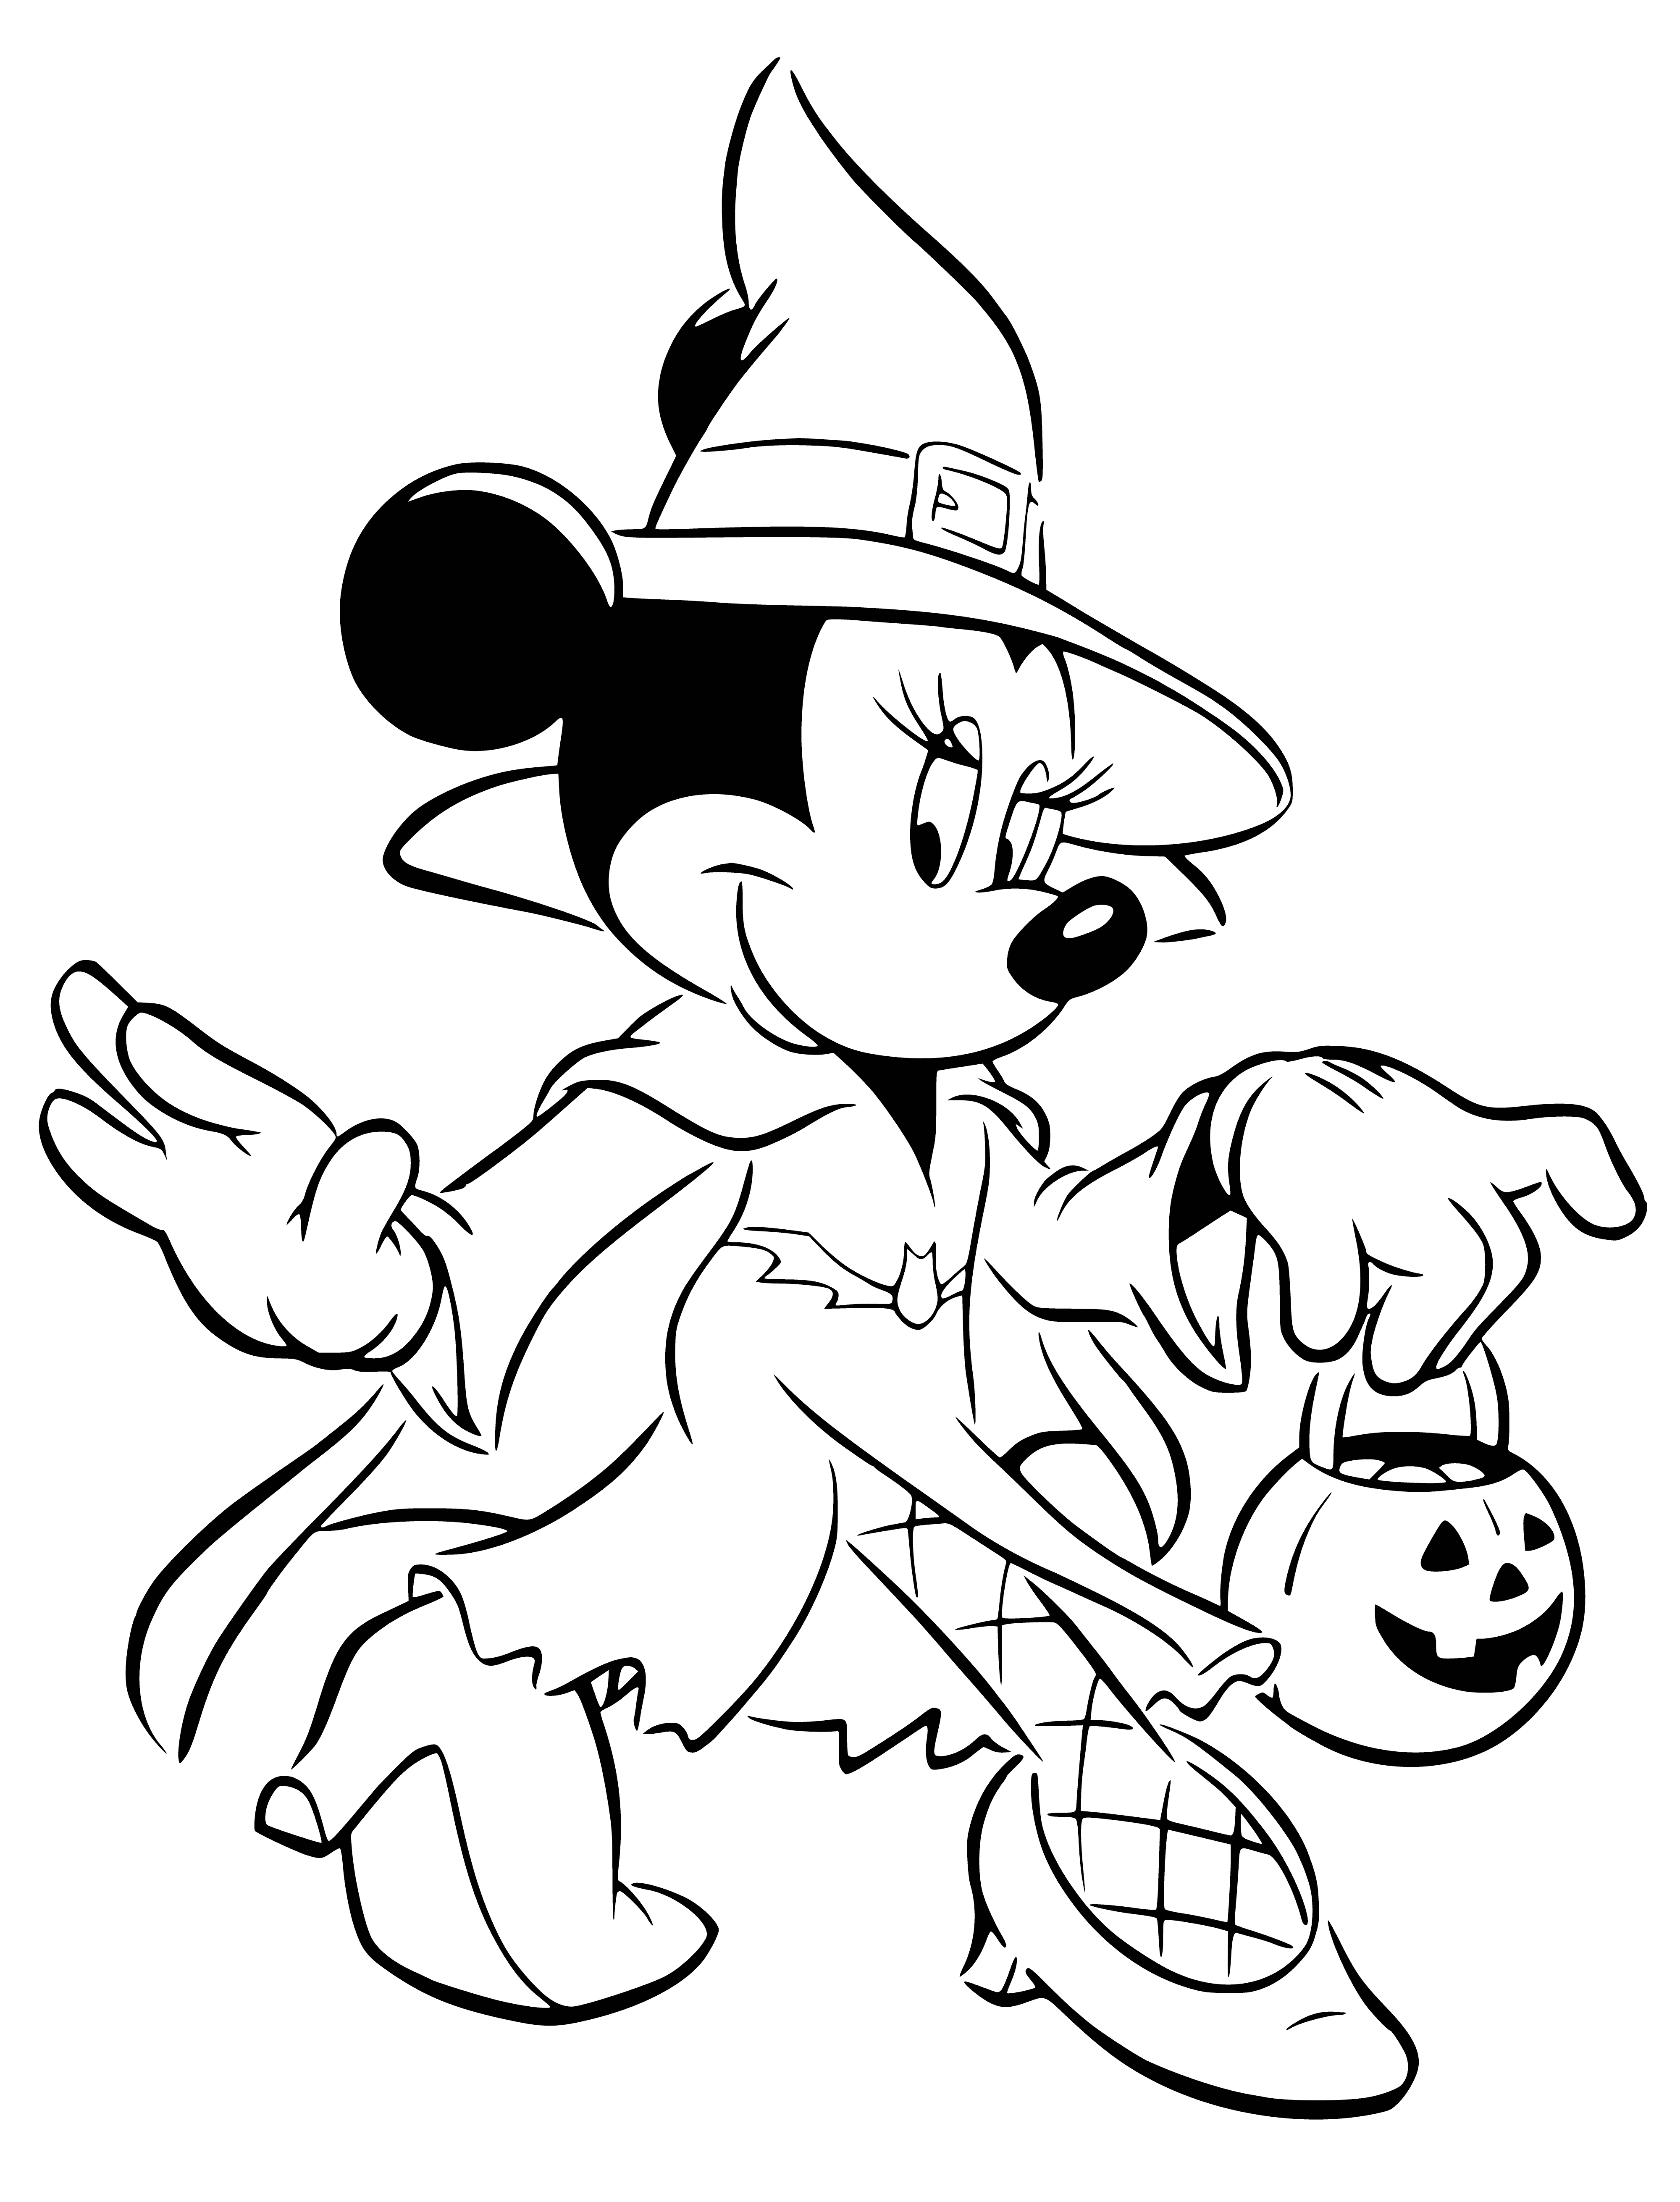 Minnie Mouse is going to Hello coloring page